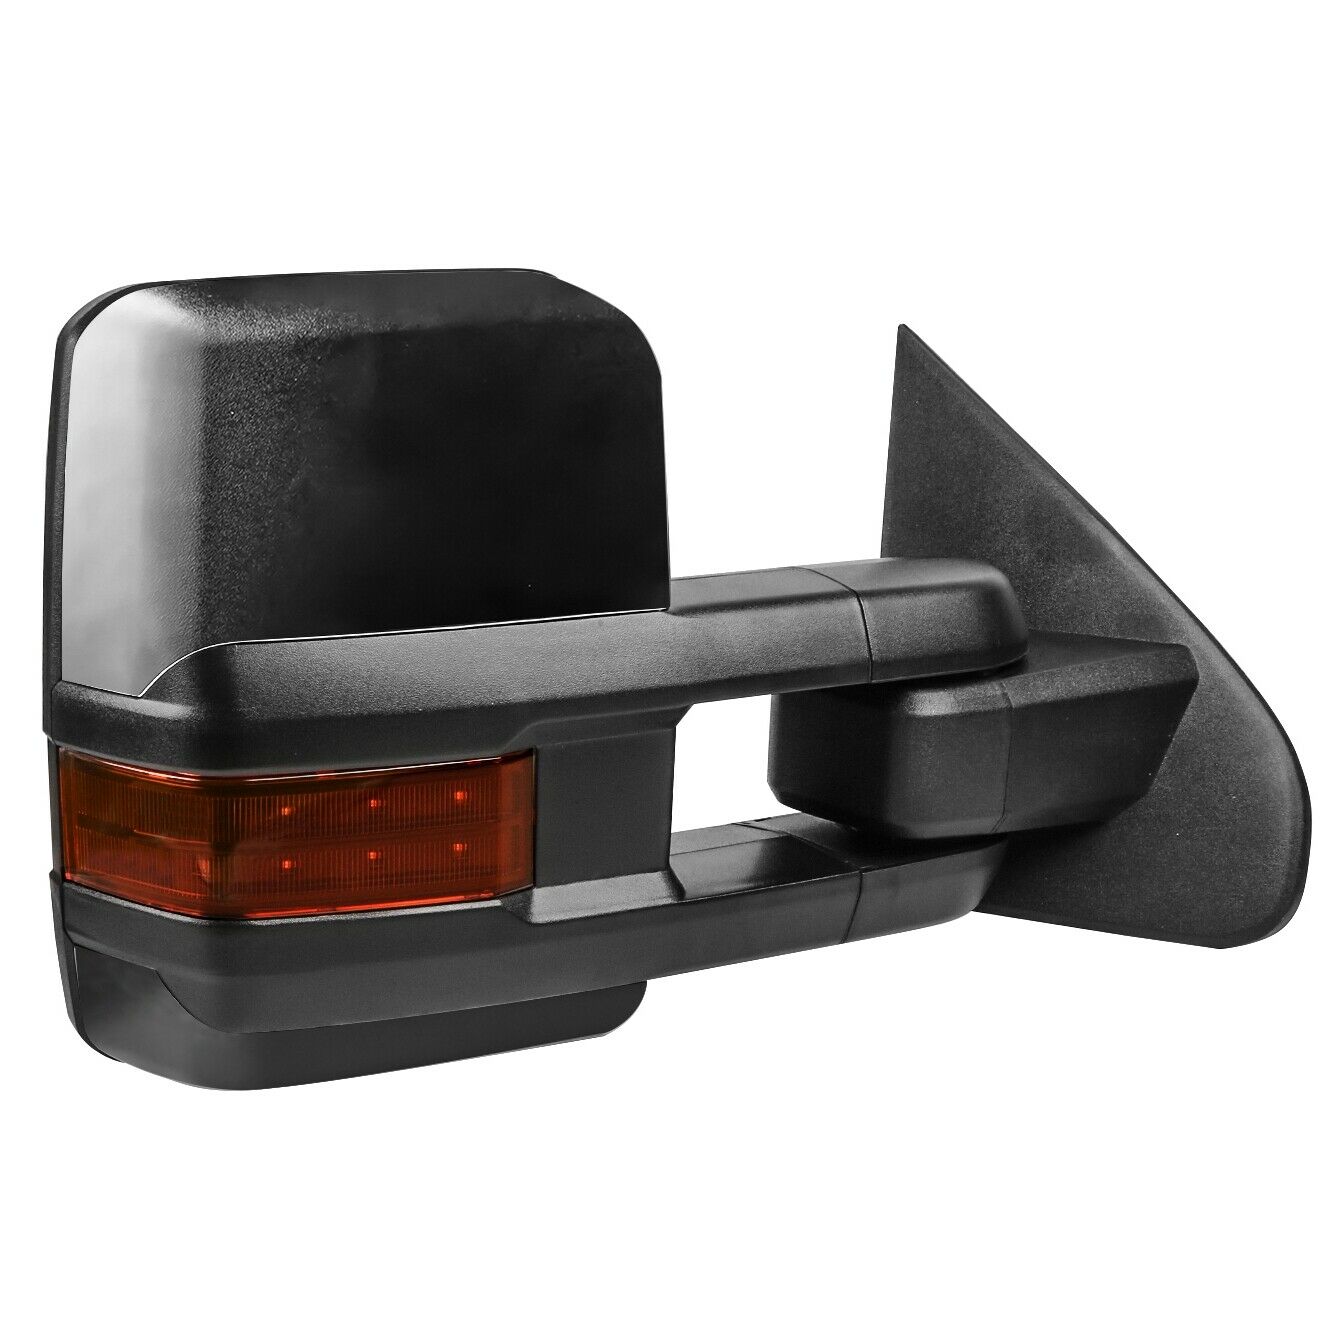 Black Tow Mirrors Set with Turn Signal, Power Fold & Heated